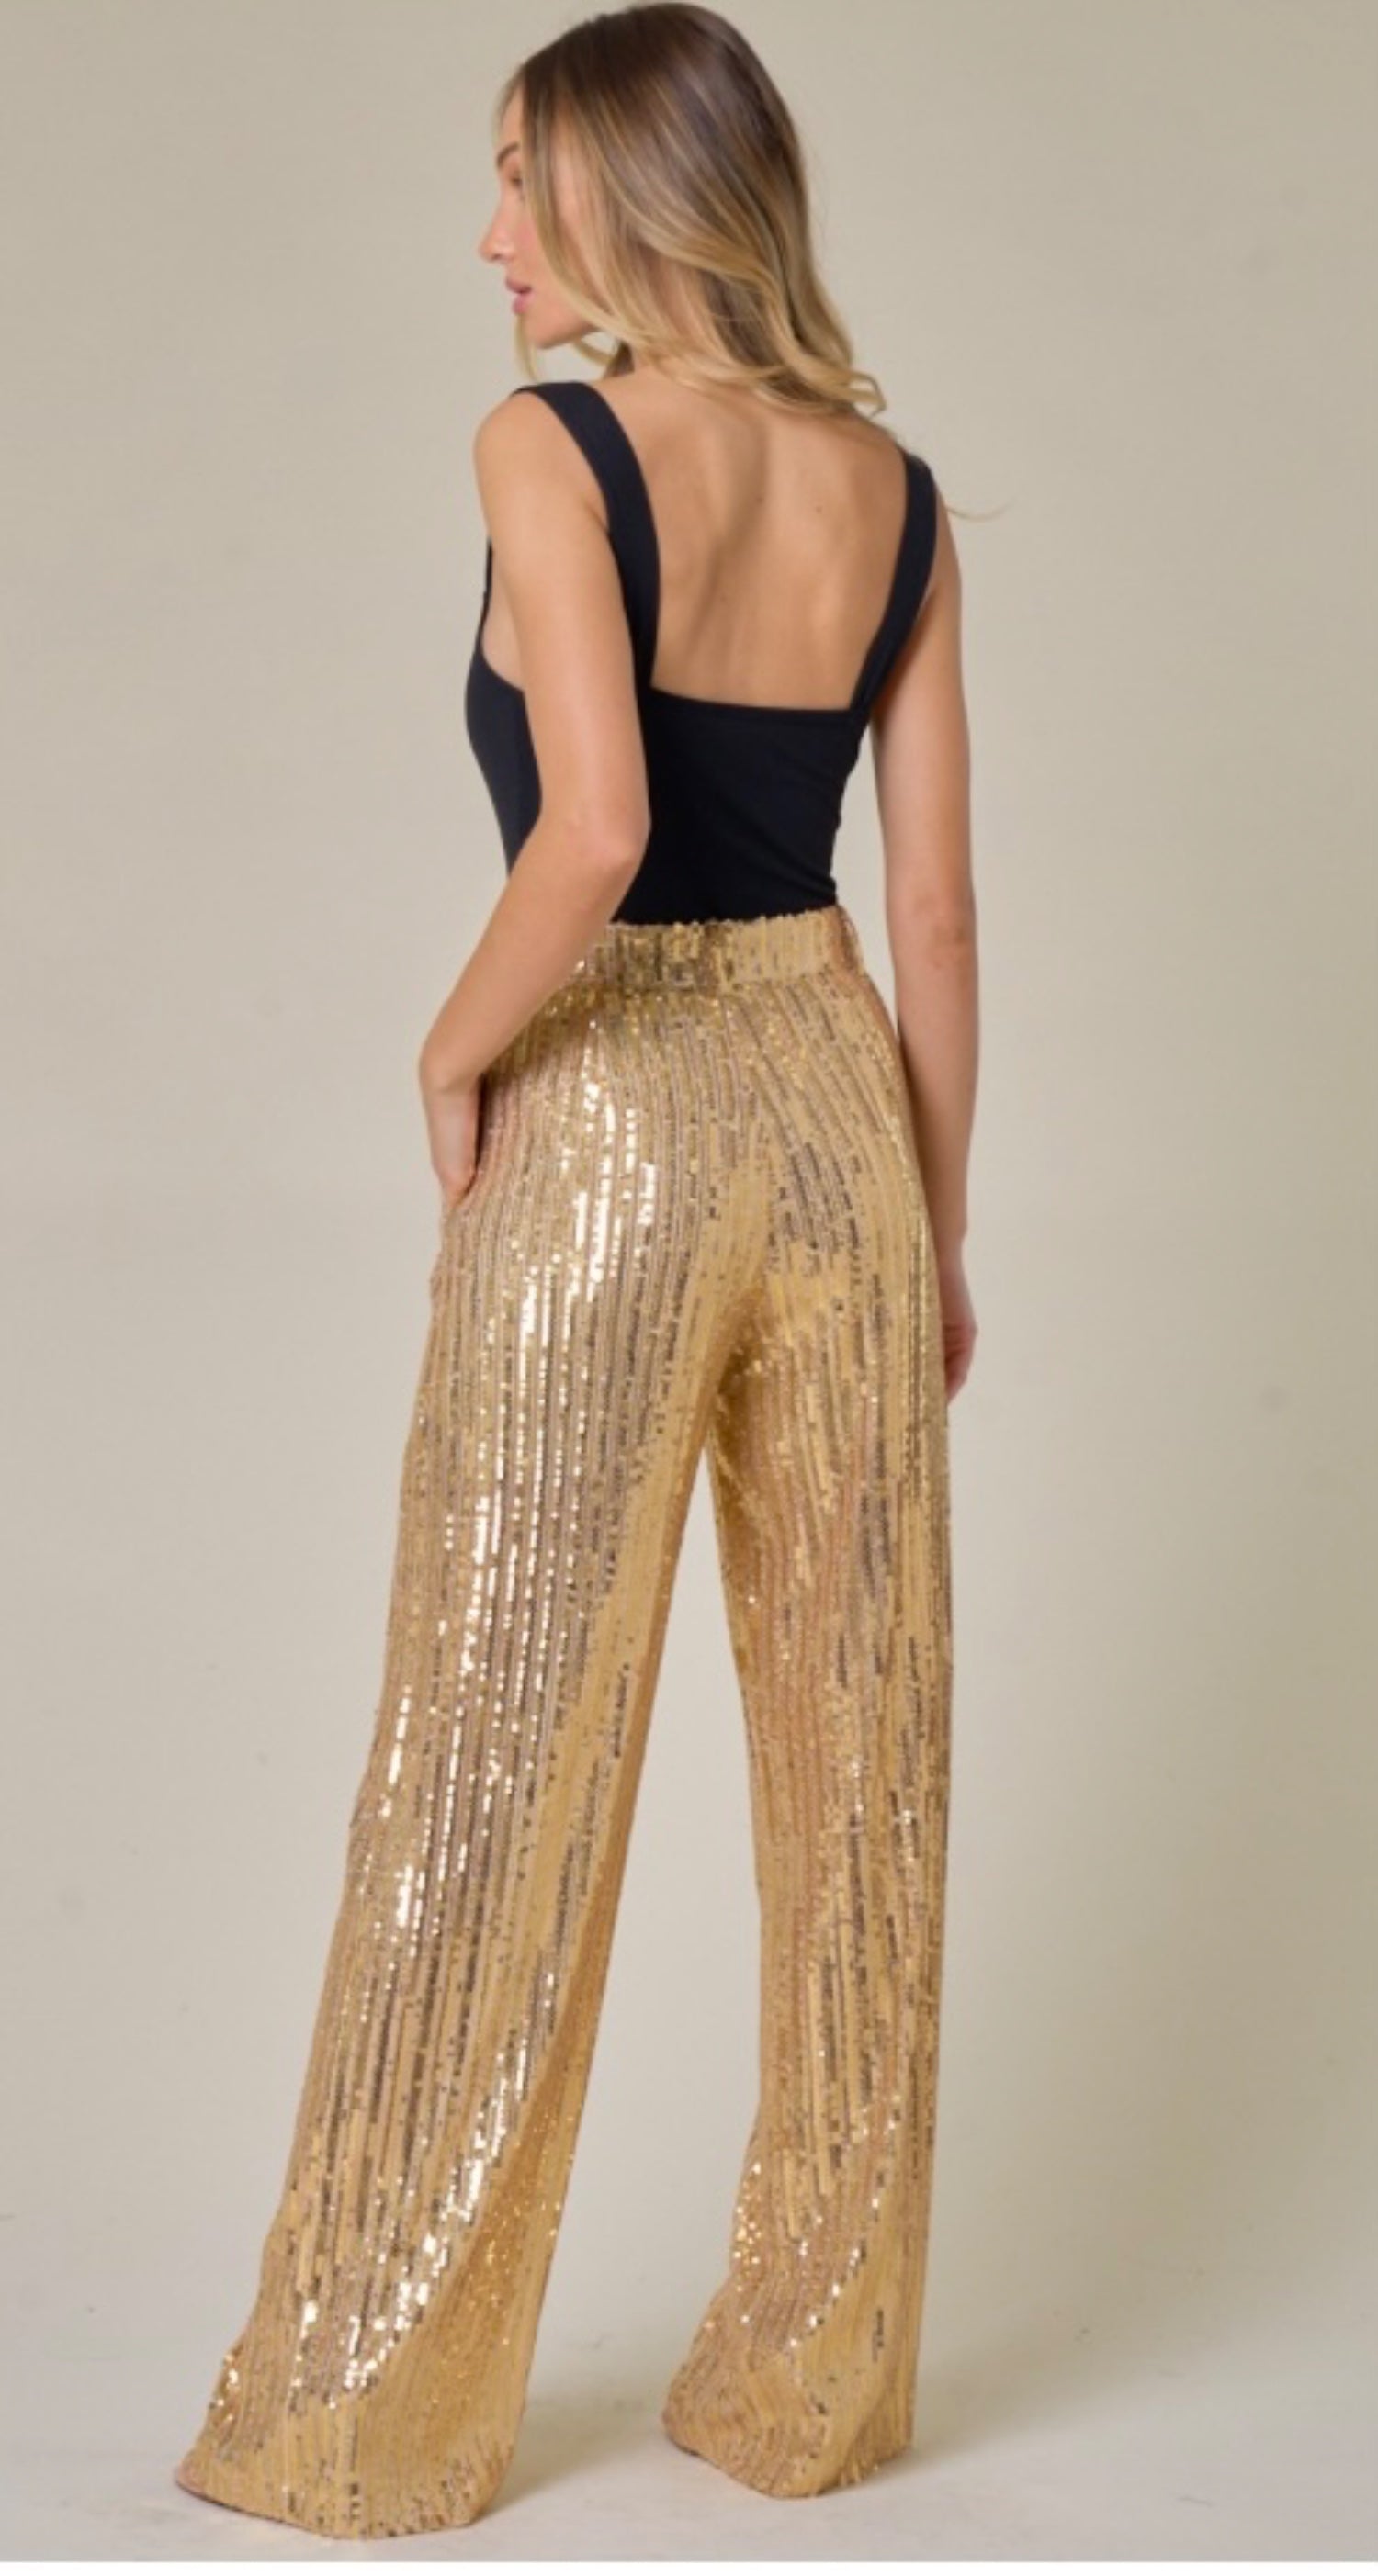 Gold Sequin Pants – Fly VSJ, Women's Clothing and Fashion Accessories